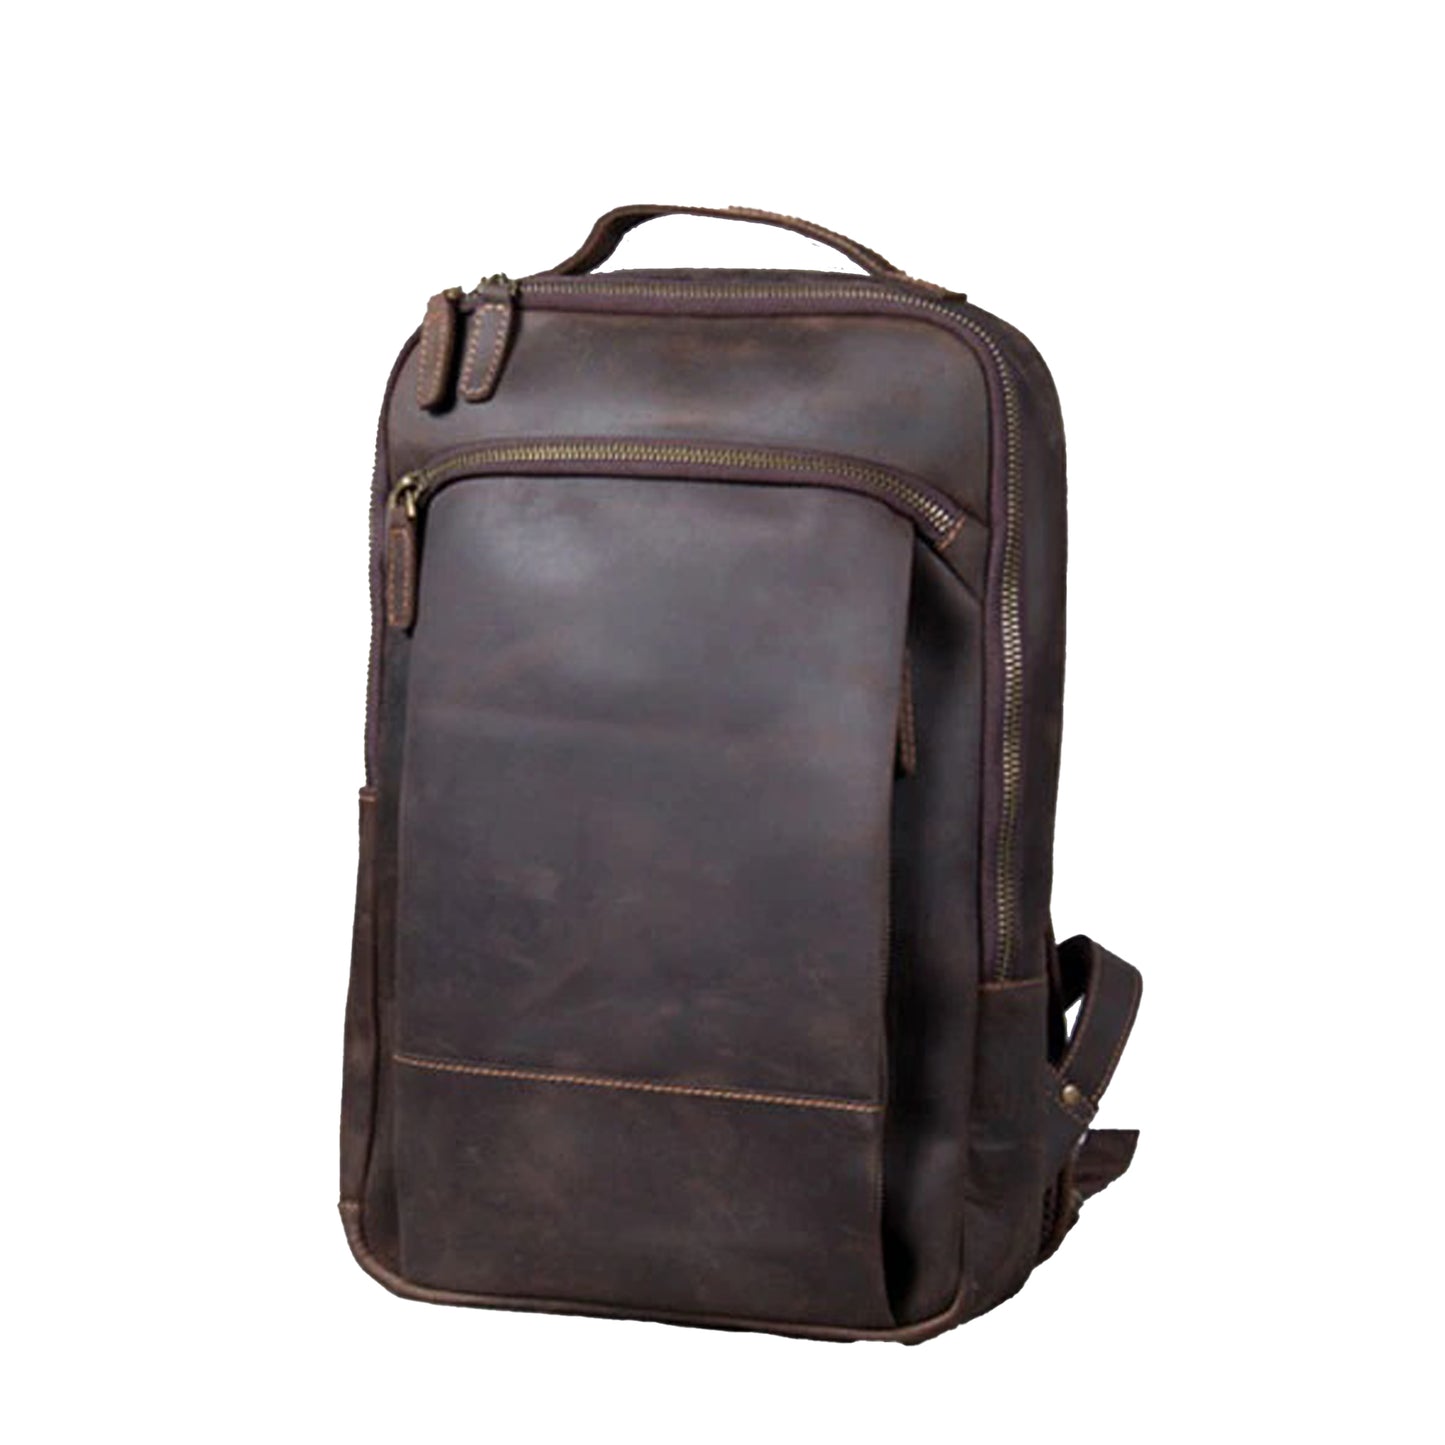 Vintage Leather Backpack, Brown Leather Backpack, Rucksack, Personalized Men Leather Backpack, Hipster Backpack gifts for him her